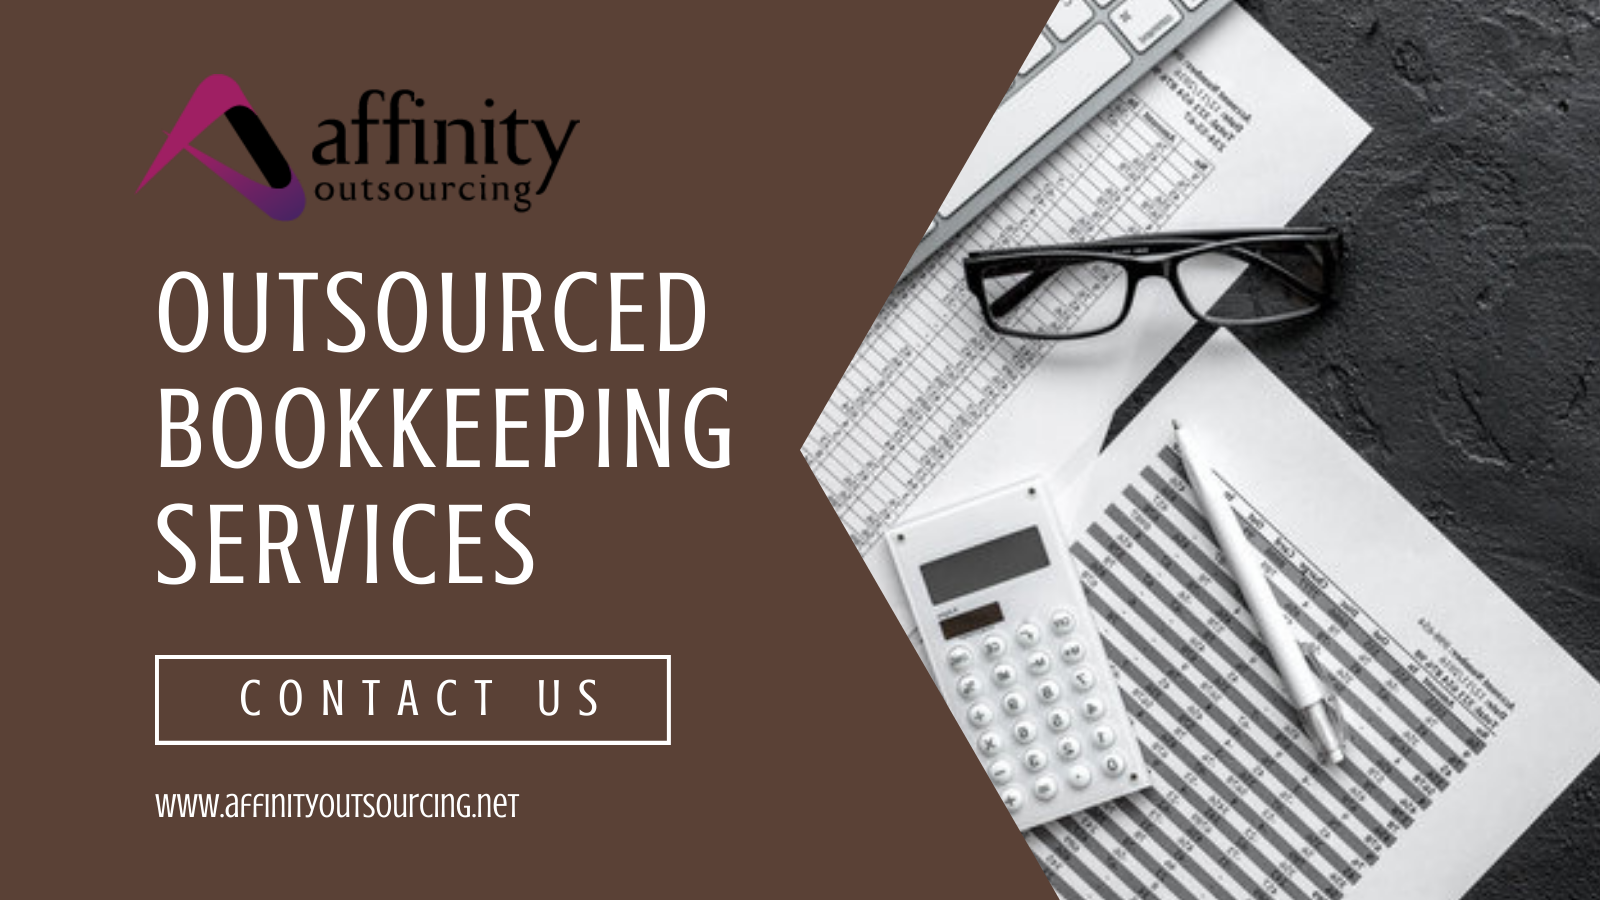 Outsourced Bookkeeping Services – Let’s Learn How, When, and Why to Consider Outsourcing